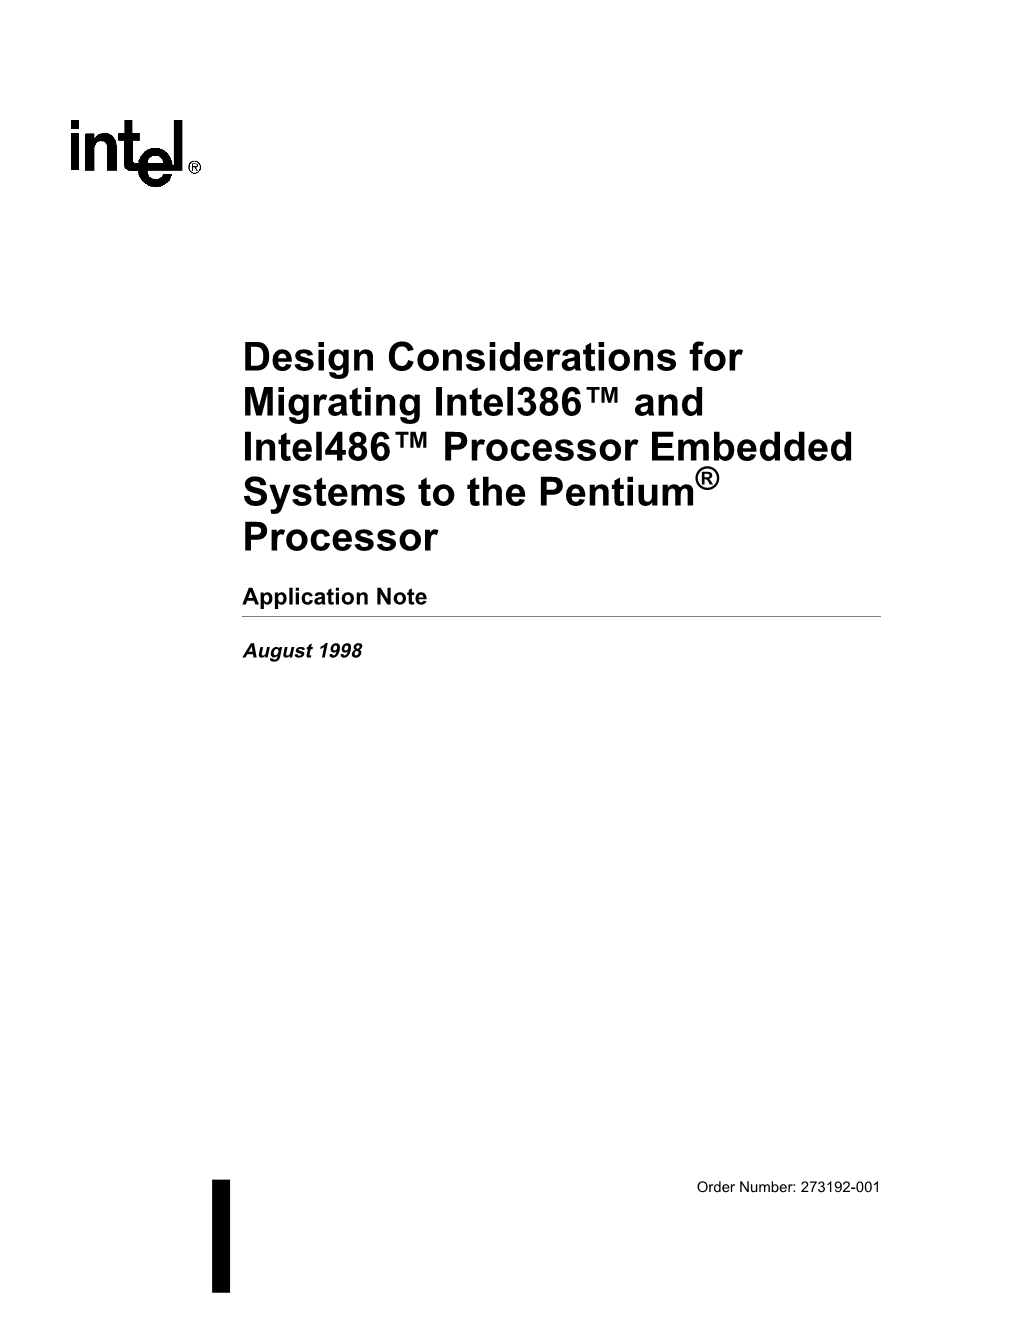 Design Considerations for Migrating Intel386™ and Intel486™ Processor Embedded Systems to the Pentium Processor